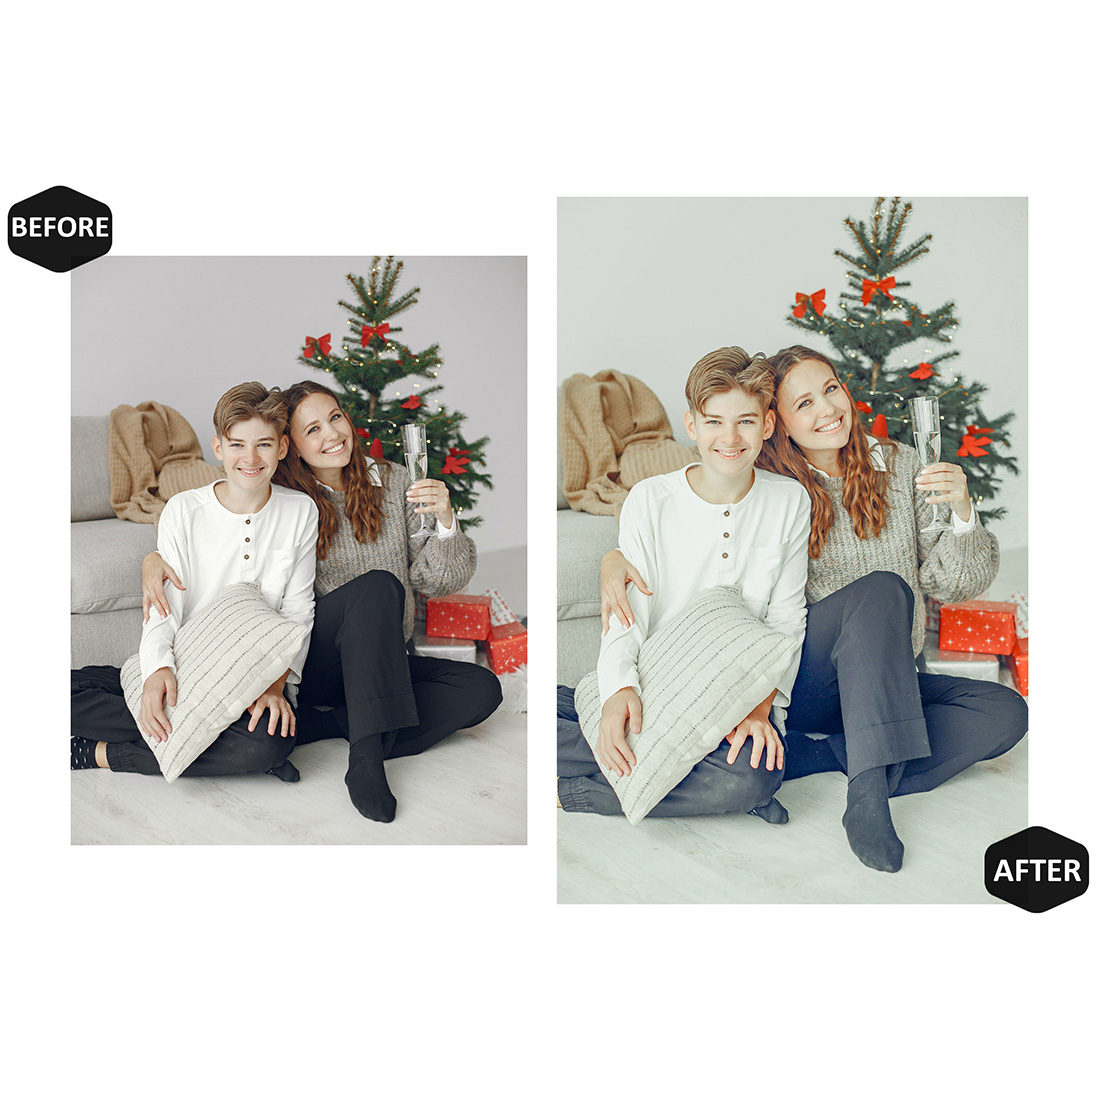 12 Photoshop Actions, Delights December Ps Action, Christmas ACR Preset, White Ps Filter, Atn Portrait And Lifestyle Theme For Instagram, Blogger preview image.